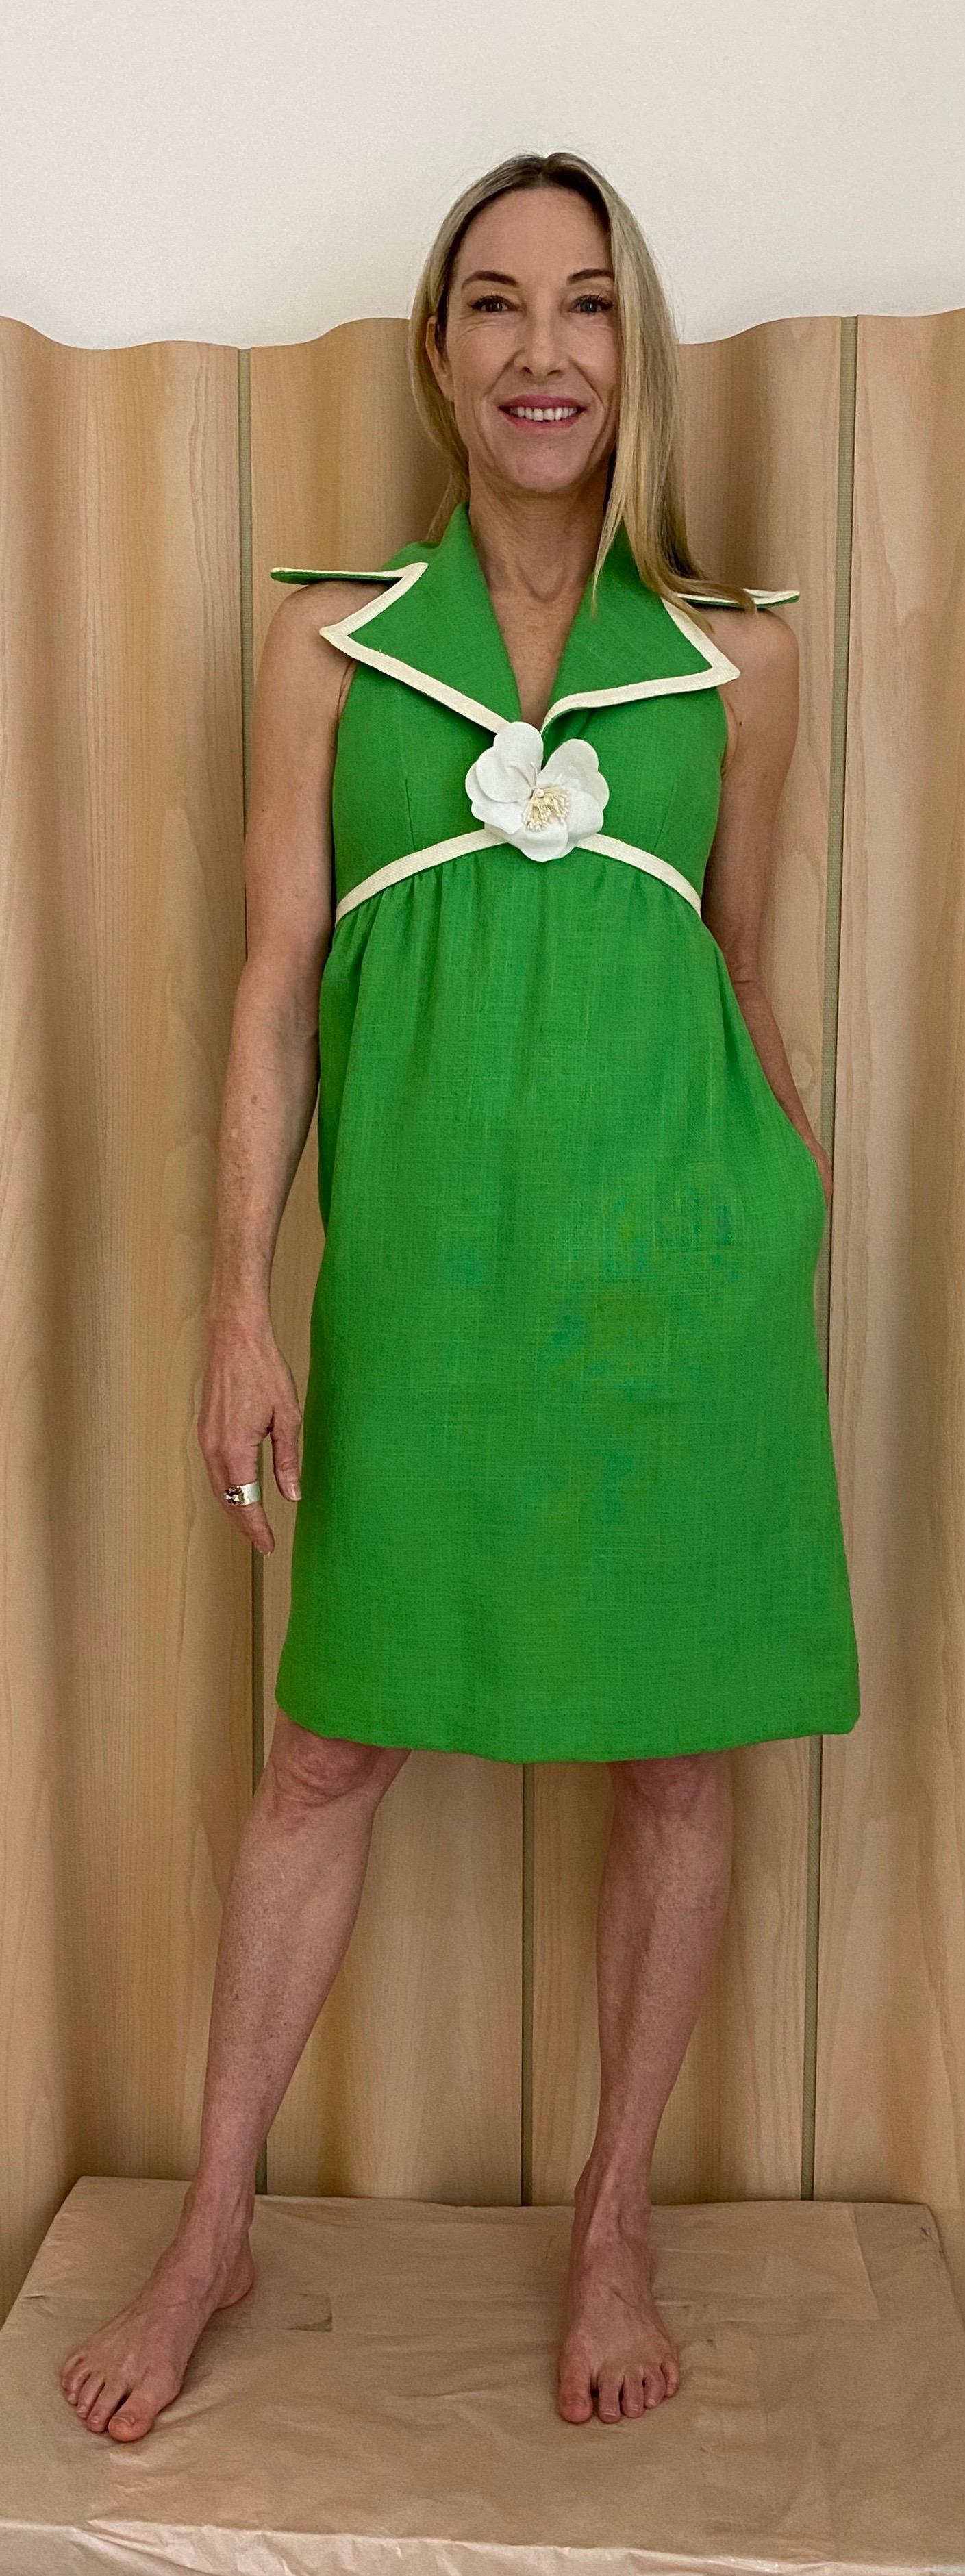 1960s Mollie Parnis Green linen  cocktail day dress.  Dress has metal zipper.  Fully lined in excellent condition. no stains or holes. pockets.

Best fit size 2/4 / Small.
Bust: 34”
Length:  38